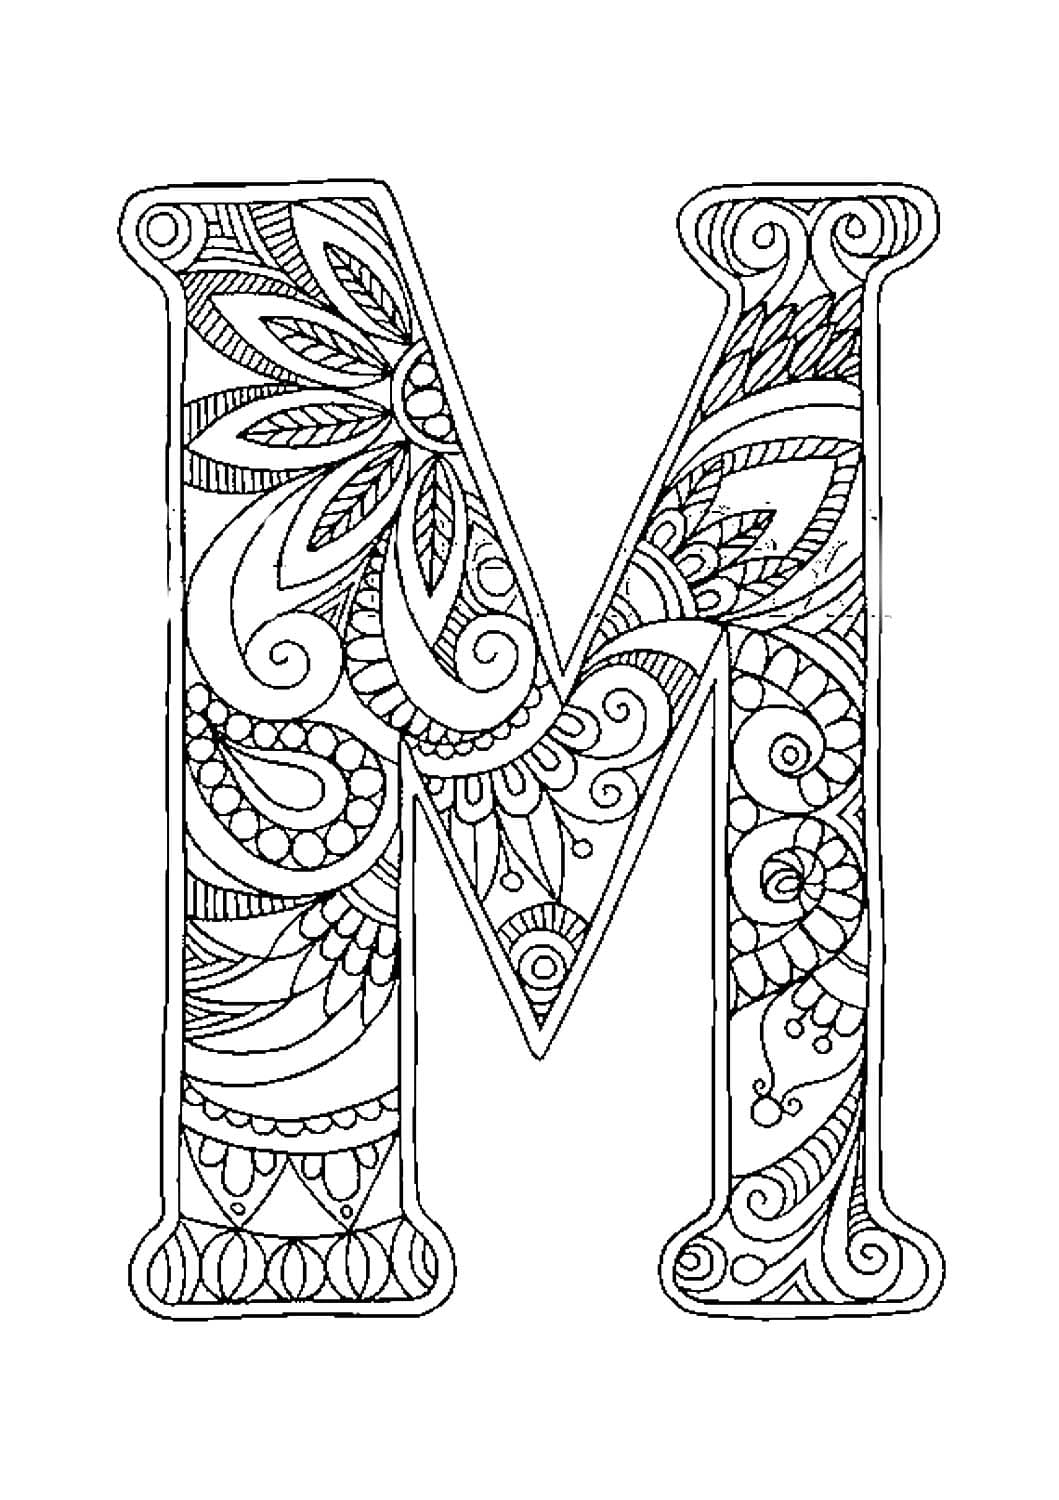 English letter m coloring page